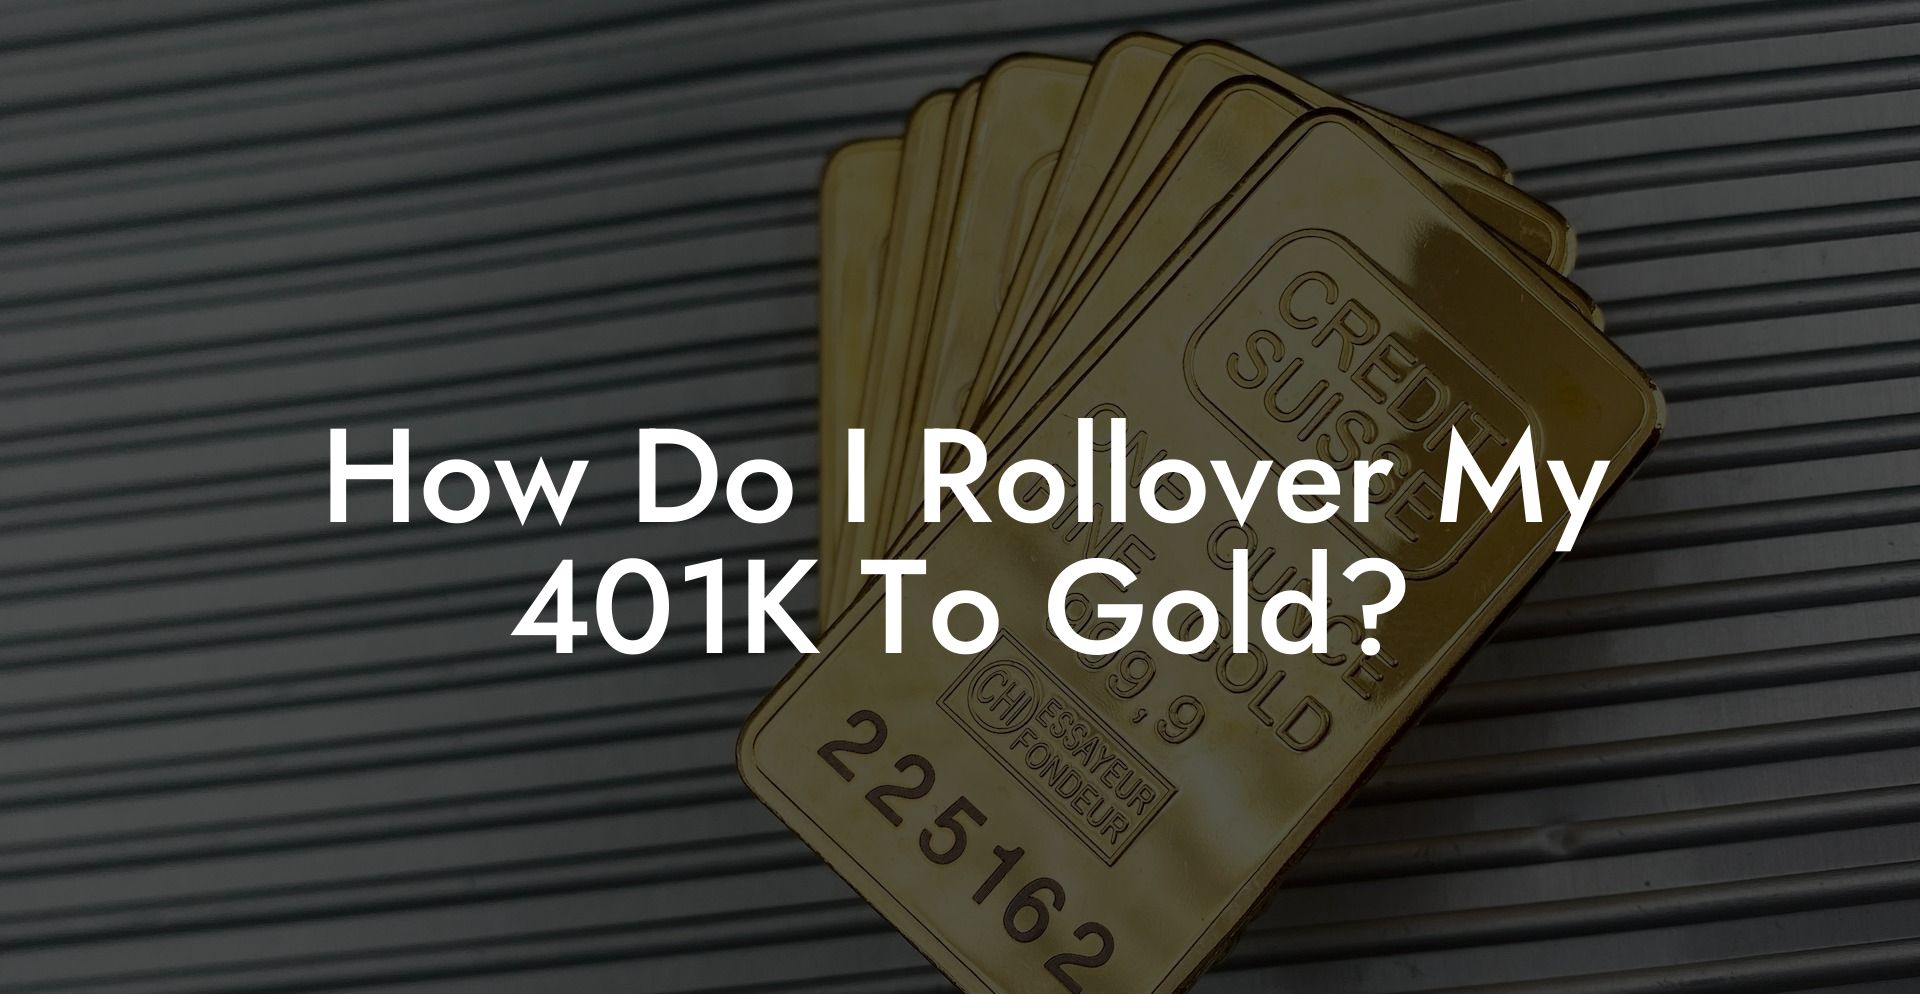 How Do I Rollover My 401K To Gold?